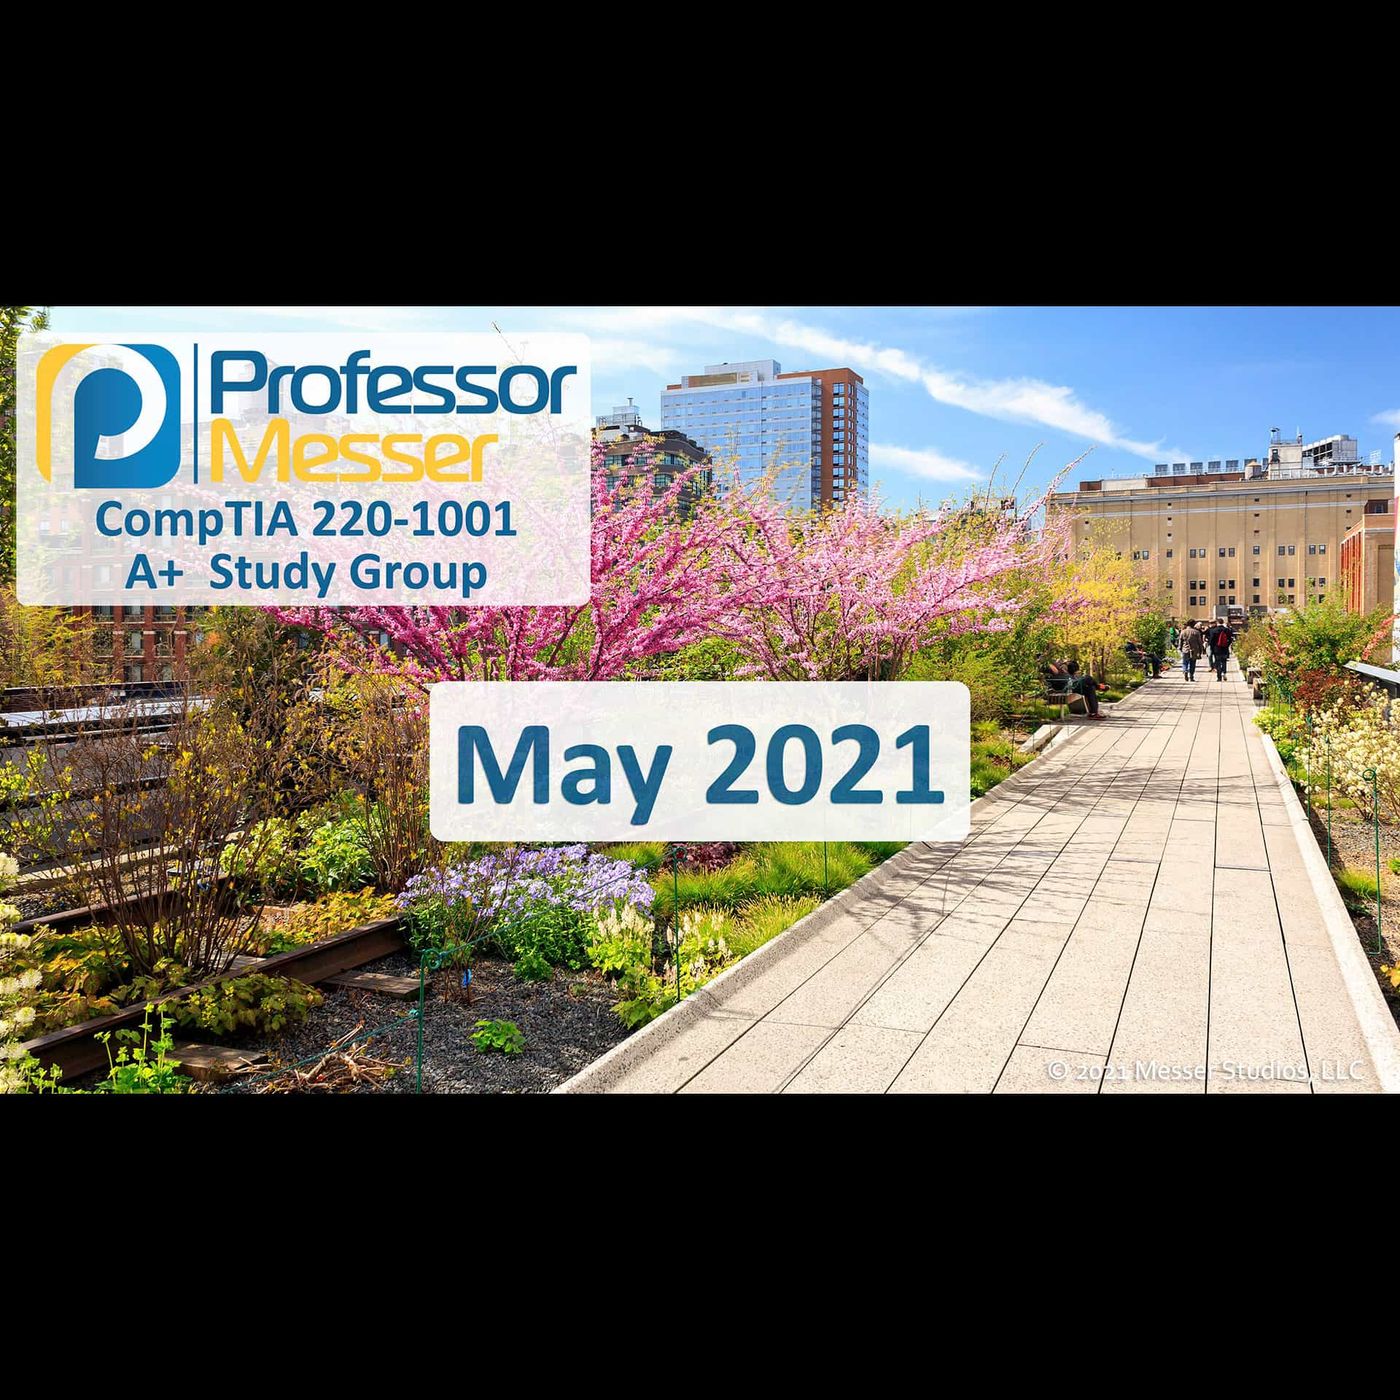 Professor Messer's CompTIA 220-1001 A+ Study Group - May 2021